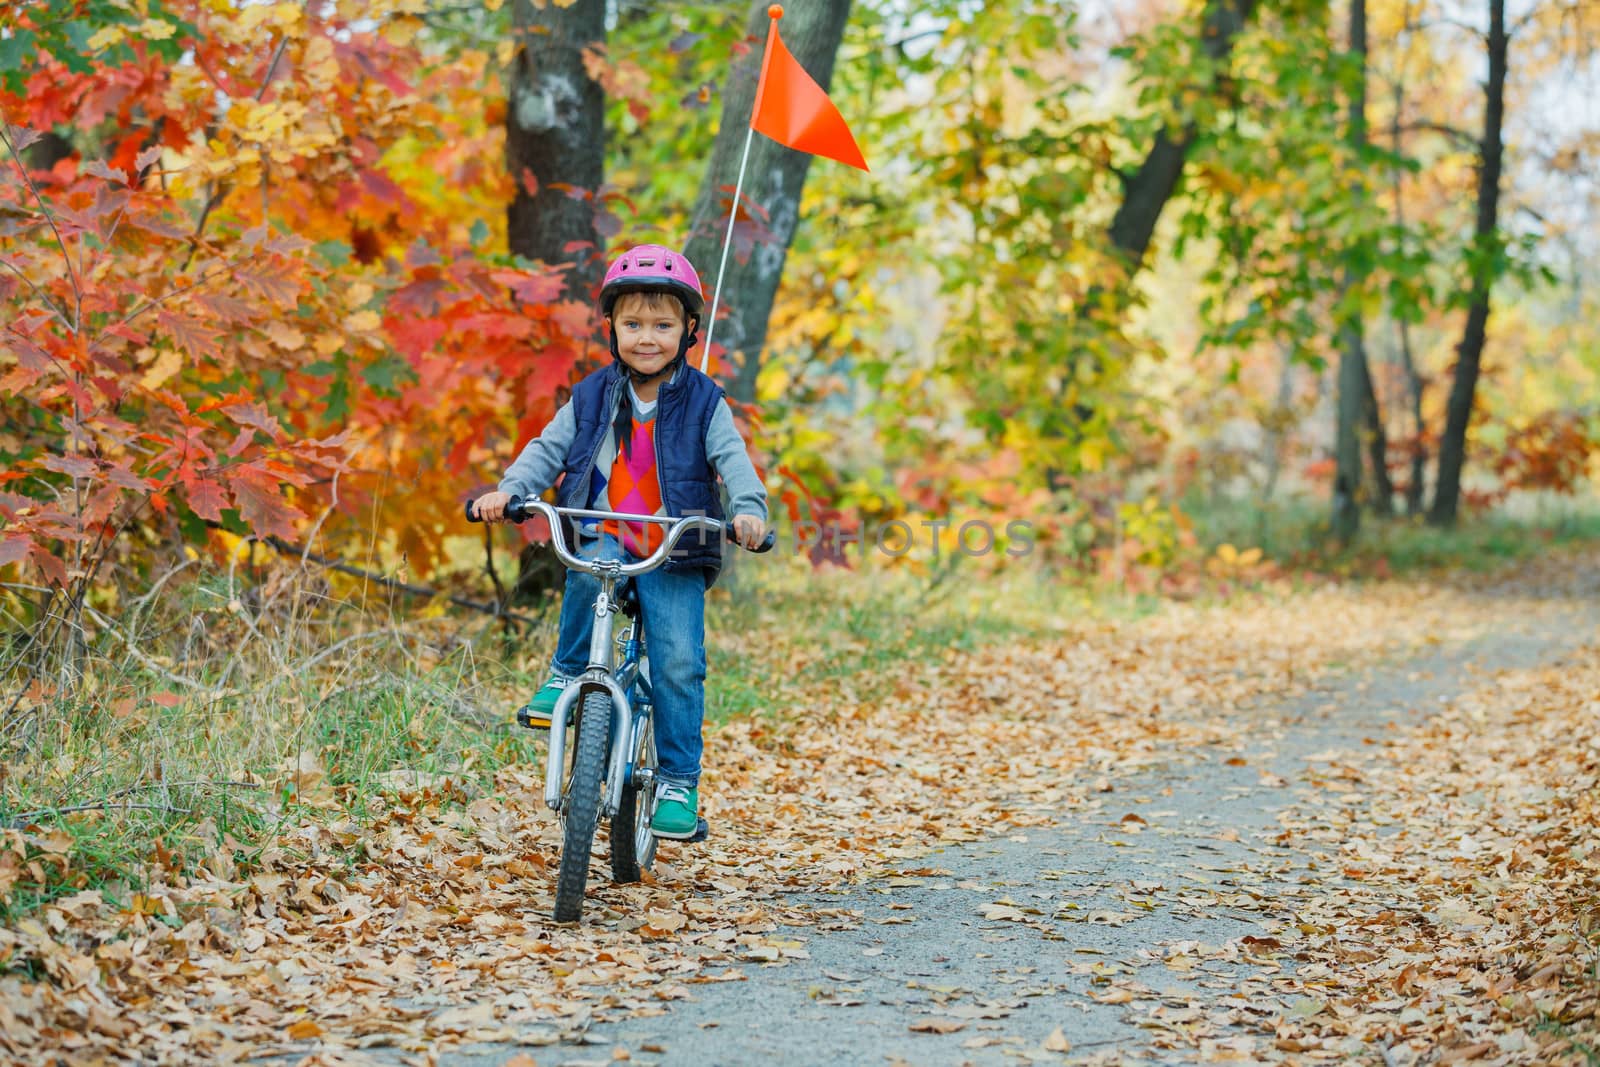 Cute little boy on bicycle in the autumn park.